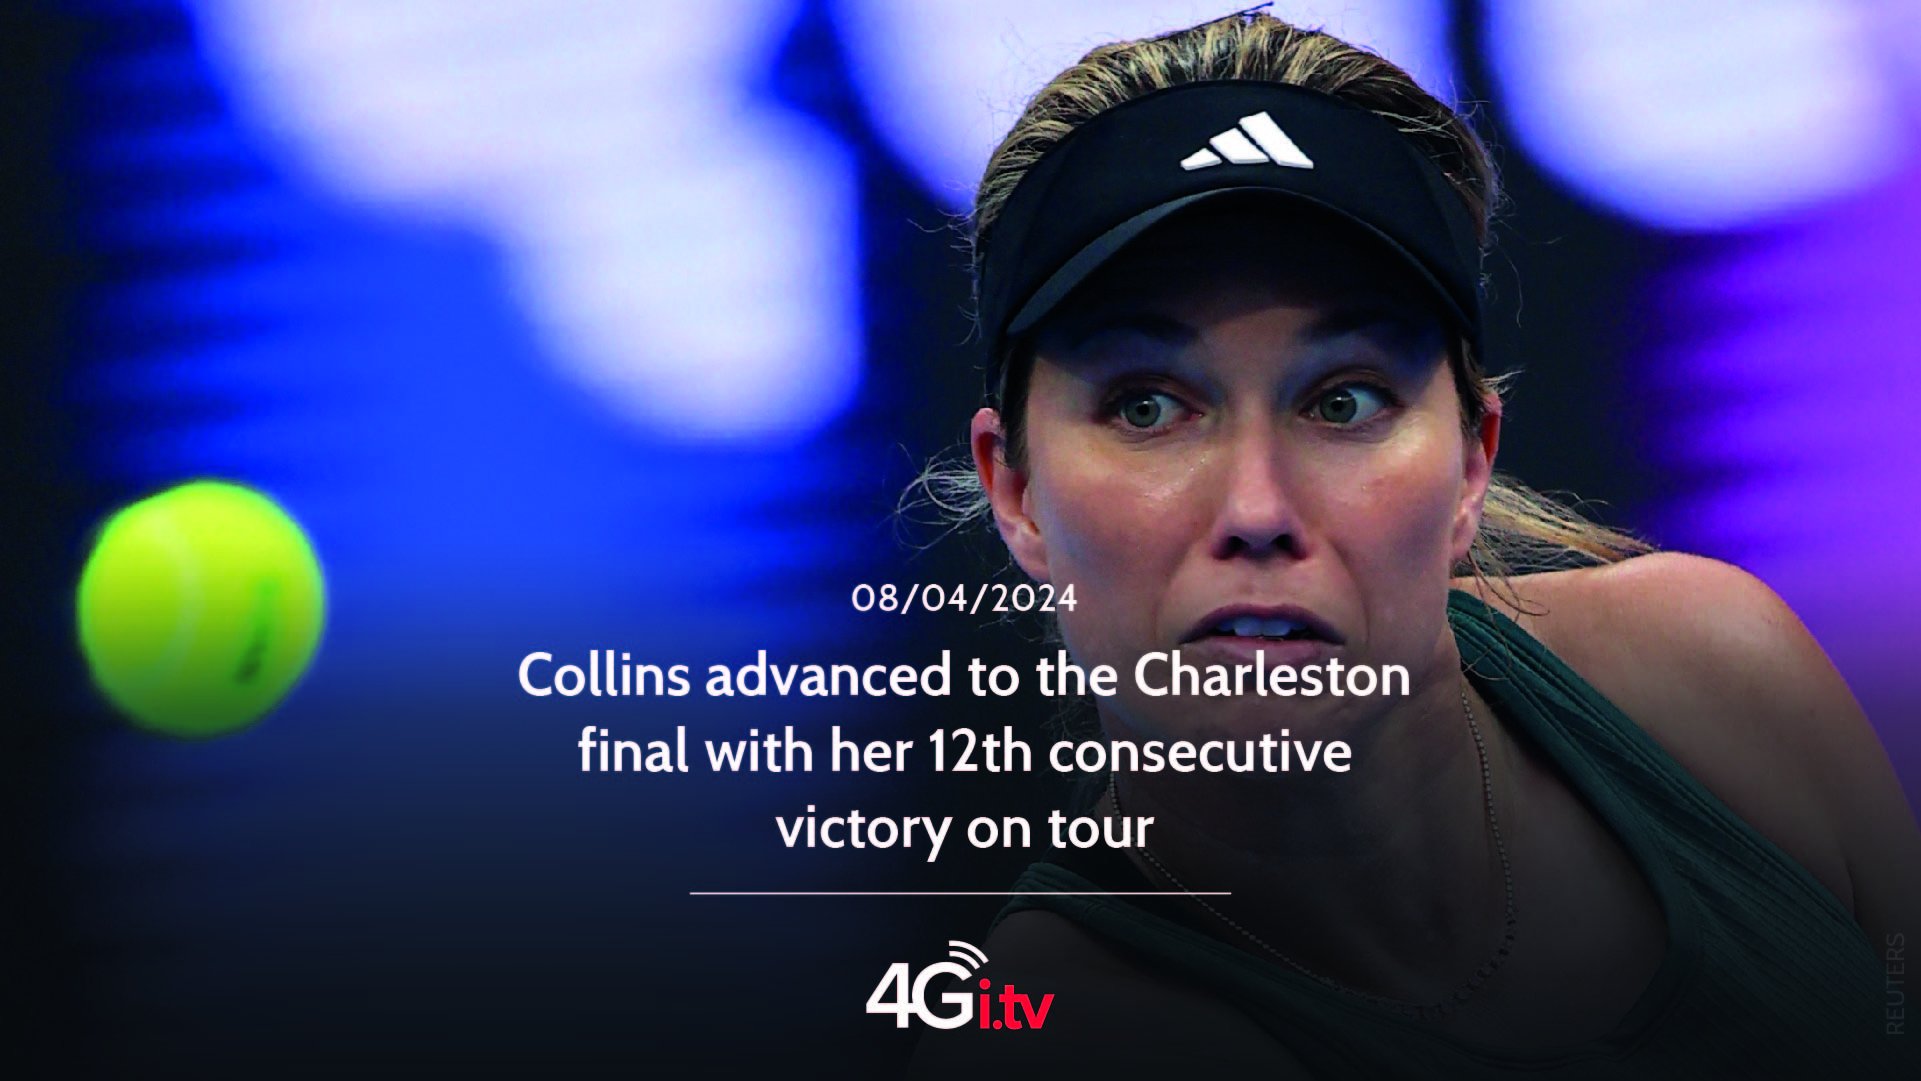 Lesen Sie mehr über den Artikel Collins advanced to the Charleston final with her 12th consecutive victory on tour 